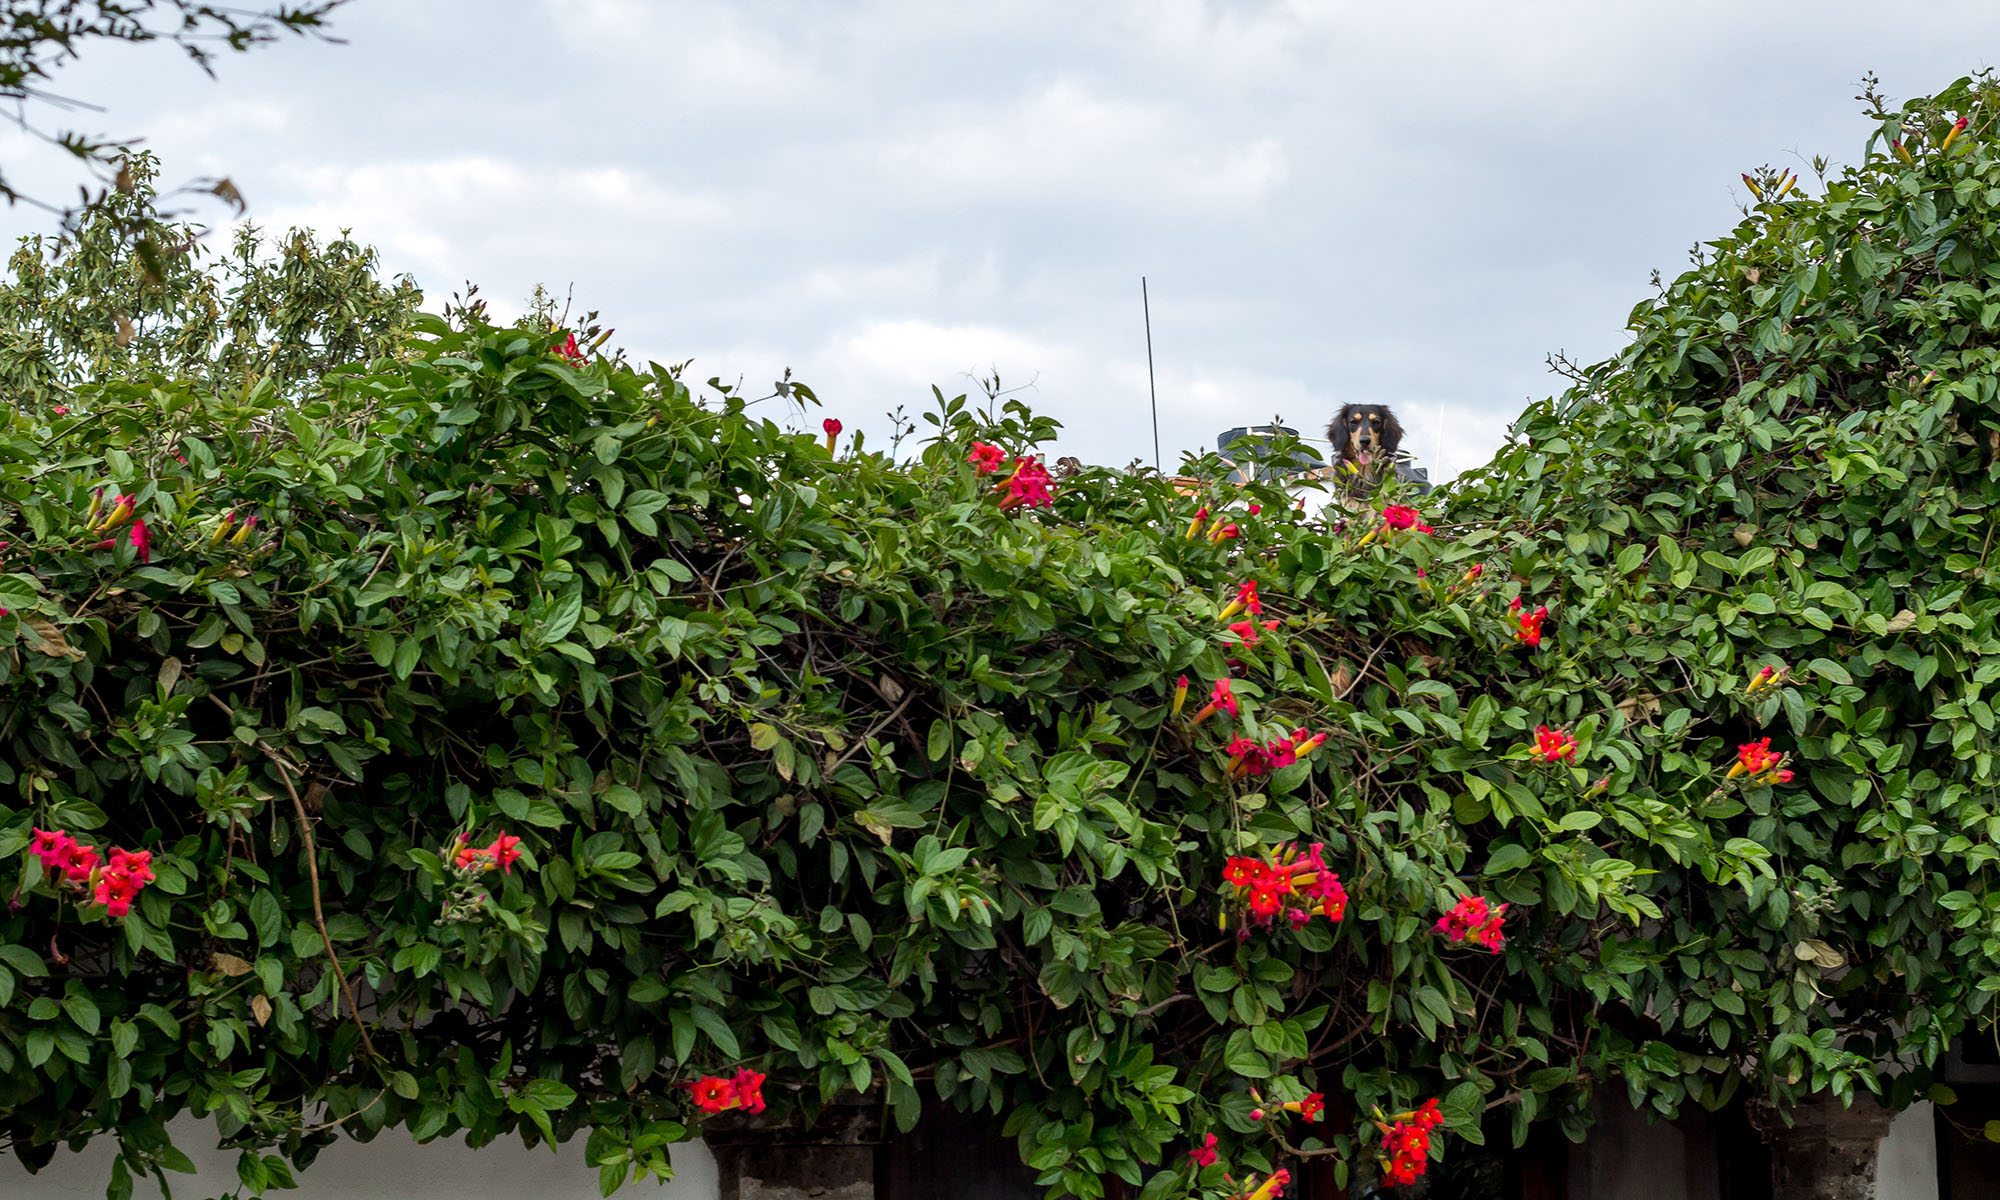 One of Guadalupe Alvarez’s several dogs keeps watch over the courtyard of her home in San Miguel de Allende, in the state of Guanajuato in Mexico.